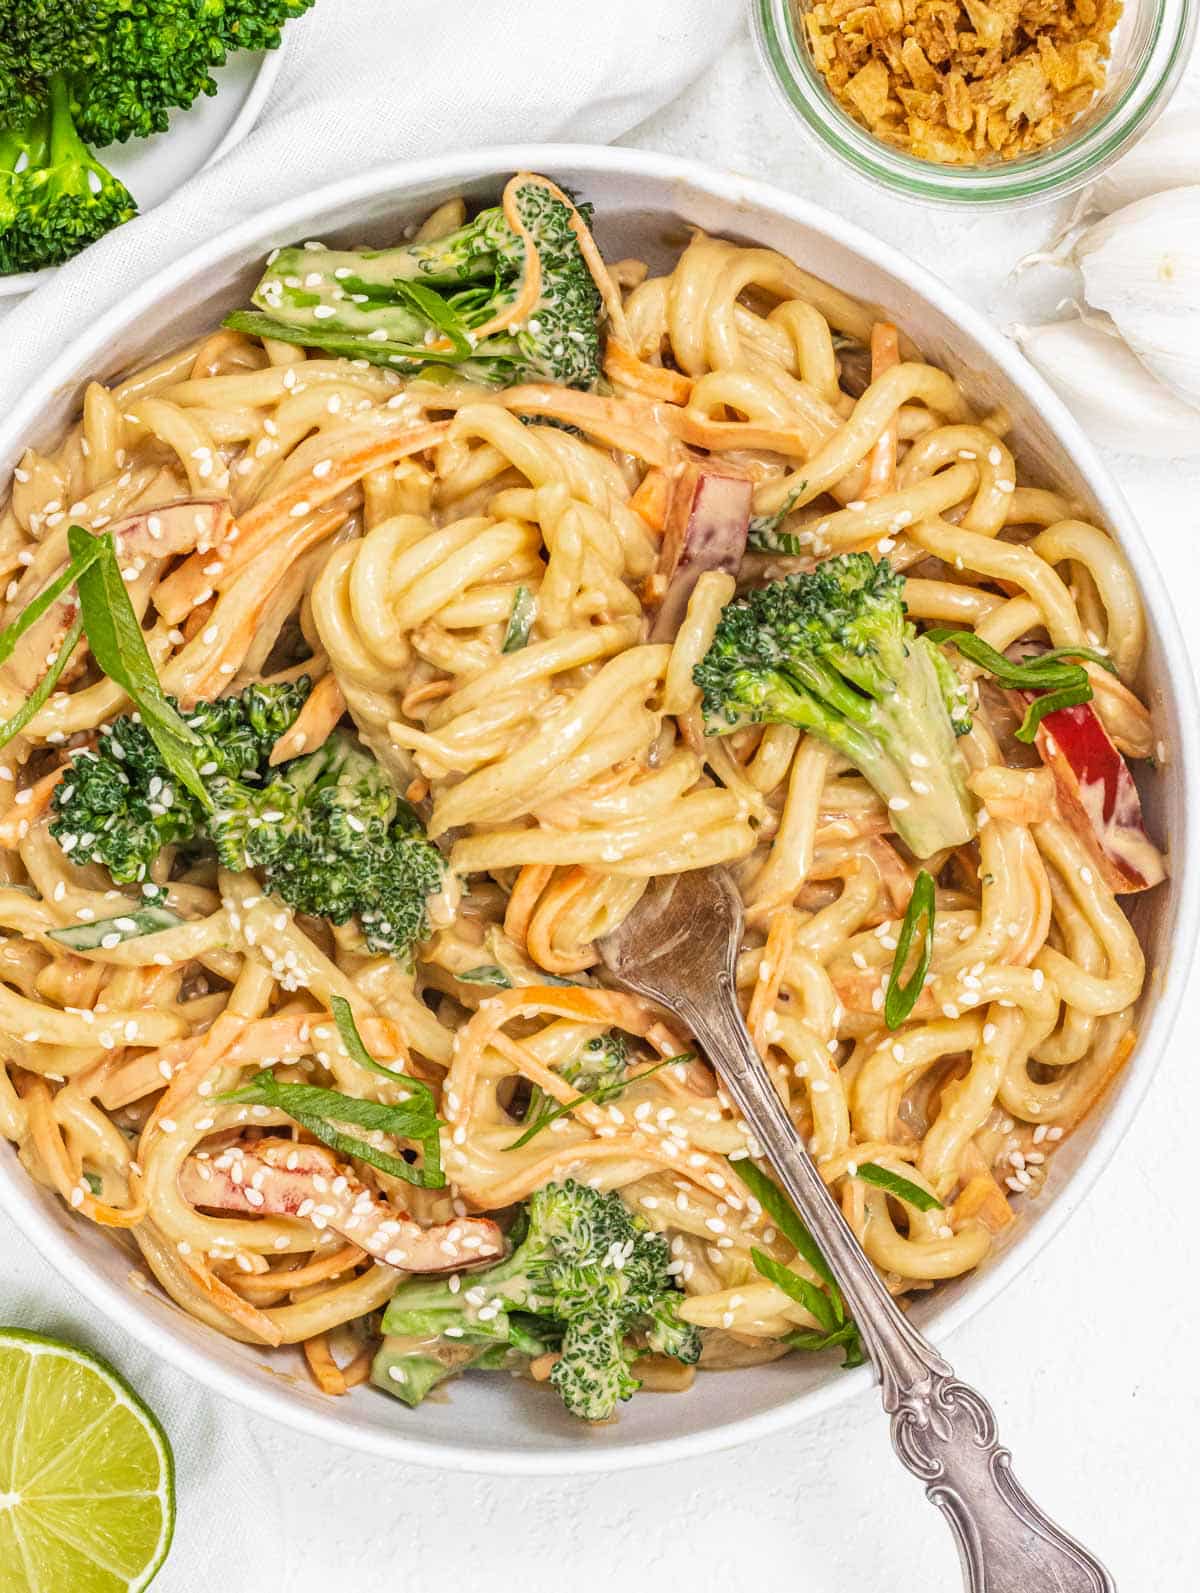 Peanut noodles with broccoli and silver fork